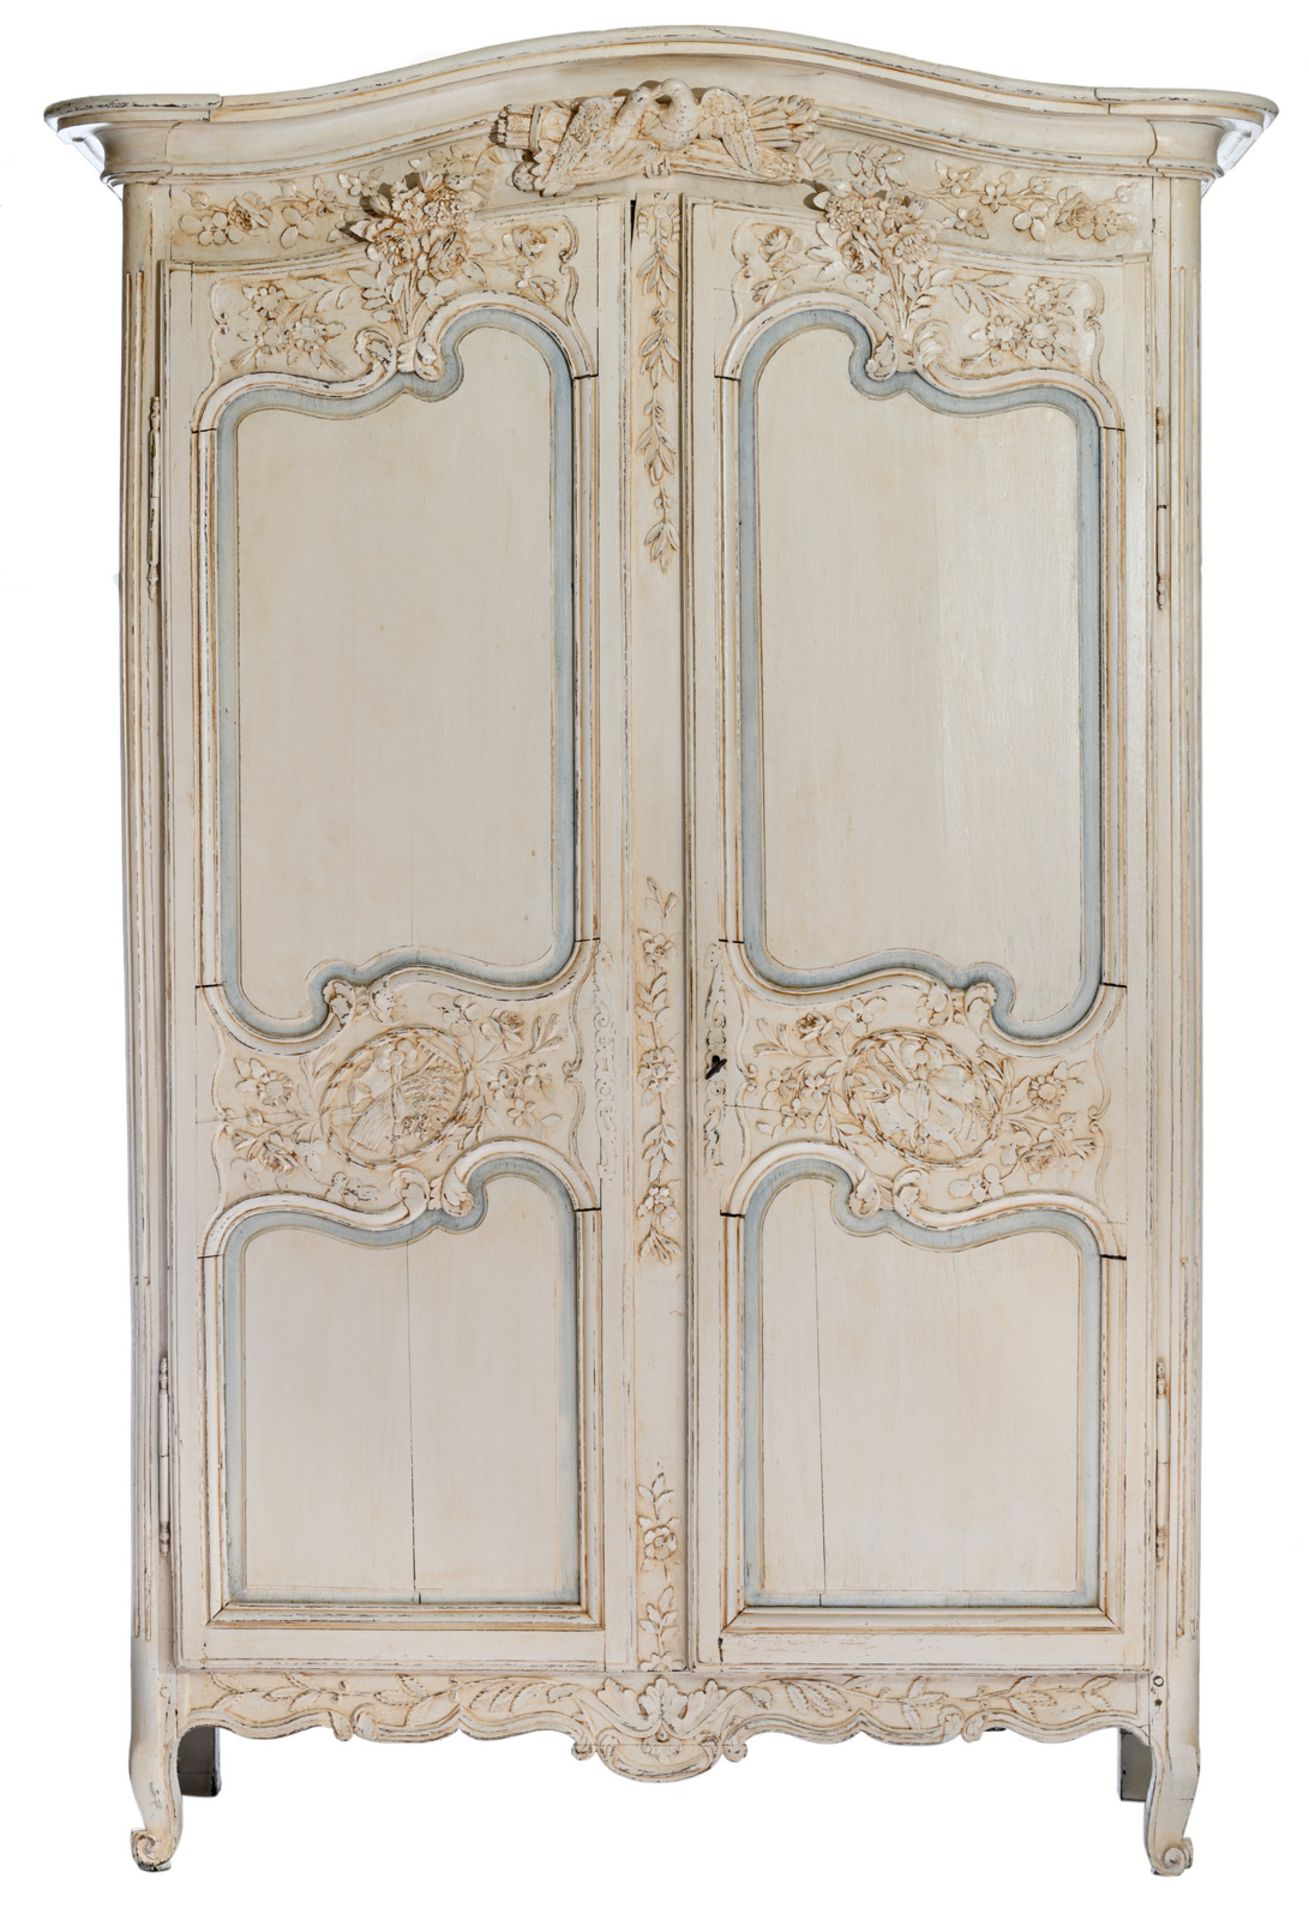 A 19thC oak wardrobe with polychrome decoration of a later date, H 242 - W 163 - D 68 cm